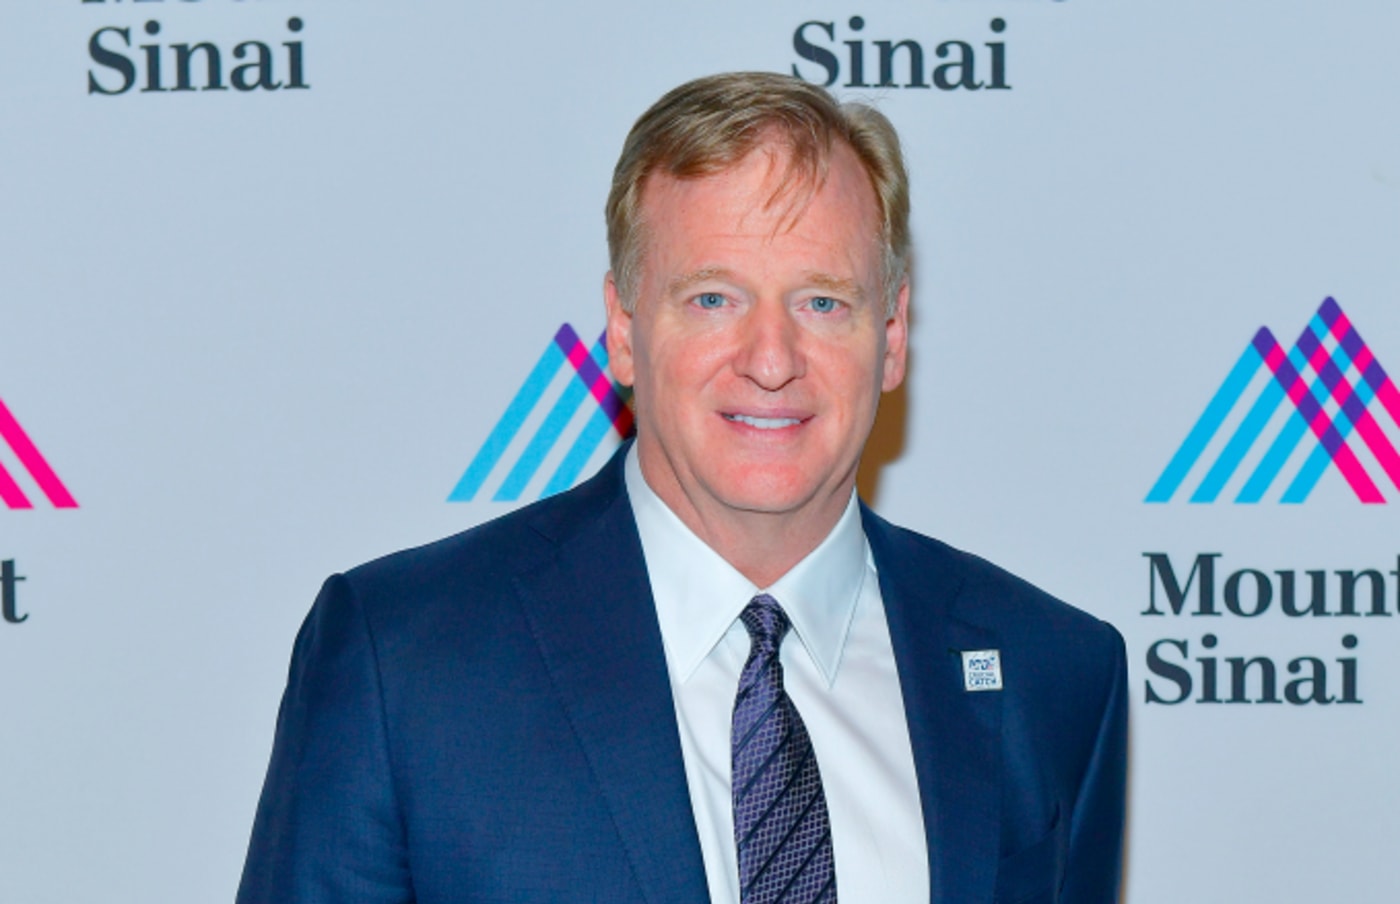 Roger Goodell attends 2019 Mount Sinai Prostate Cancer Research Gala